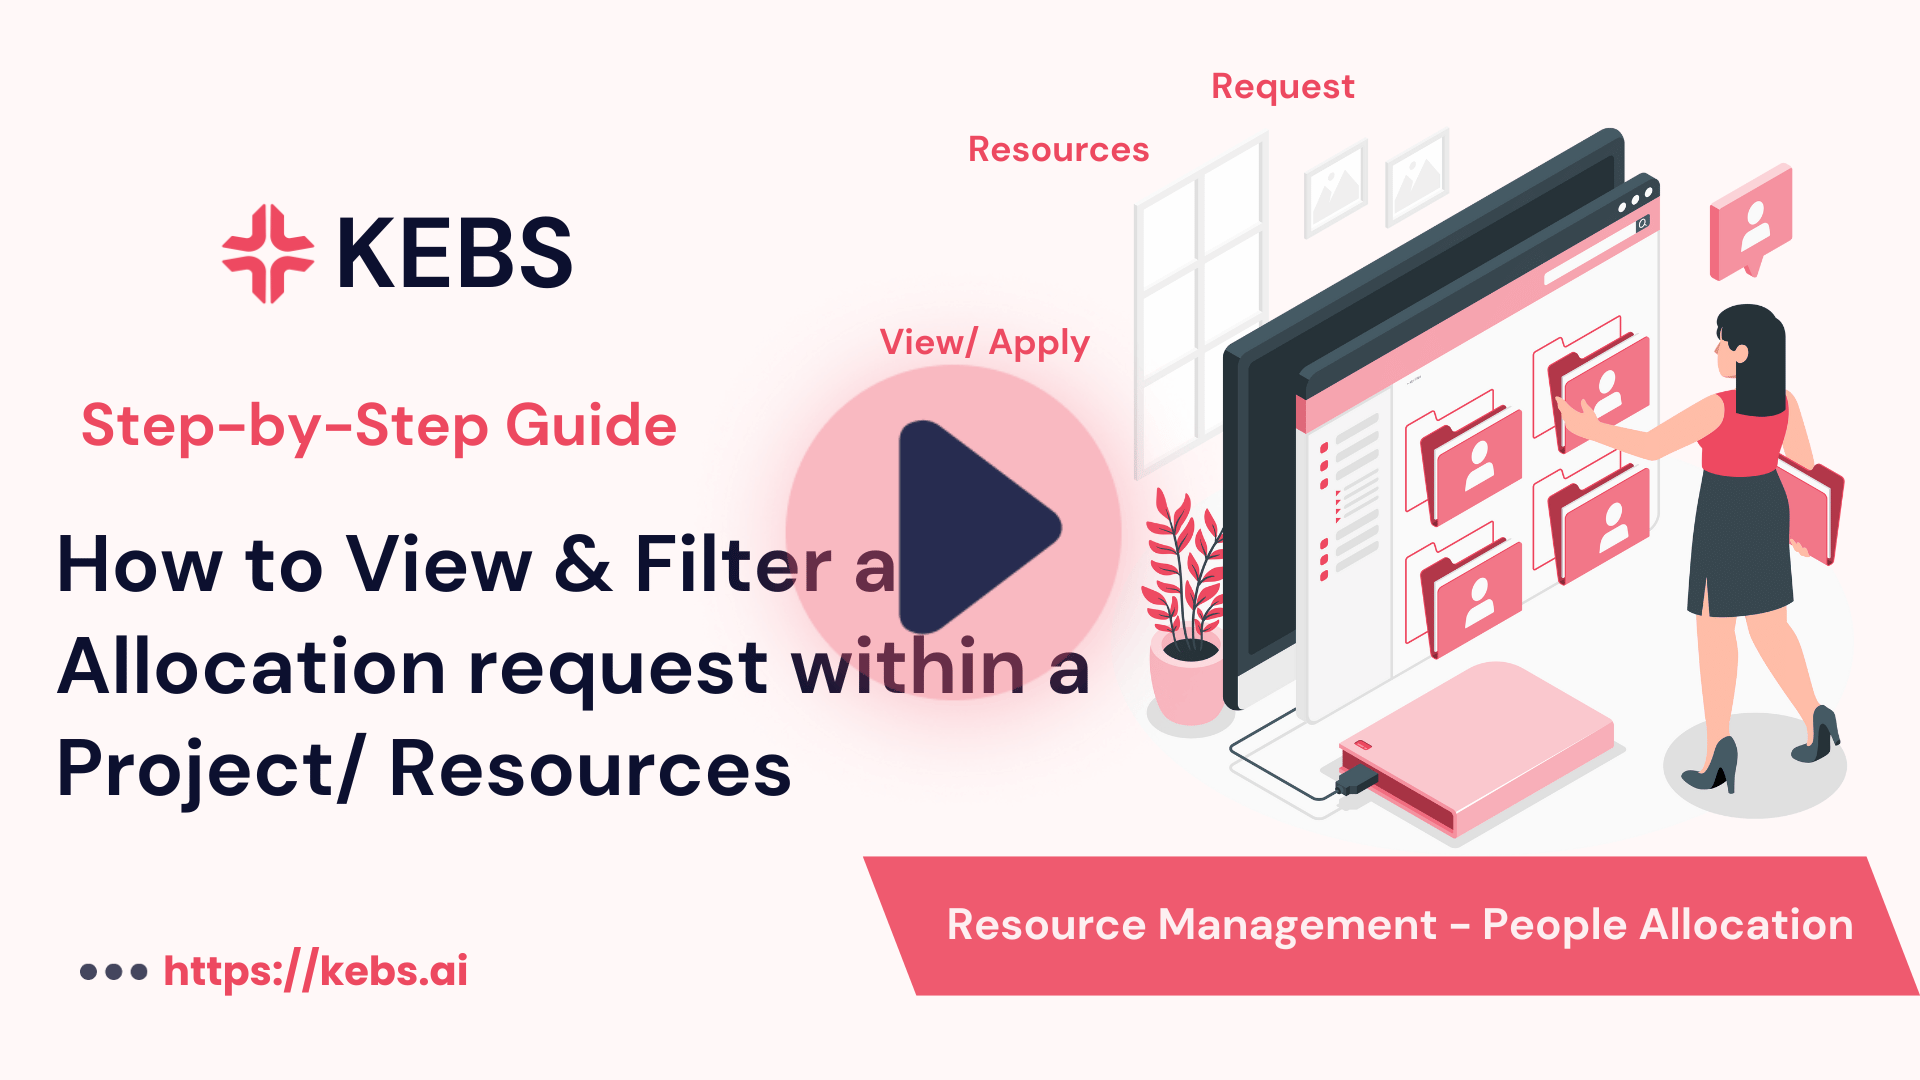 How to View & Filter an Allocation request within a Project Resources